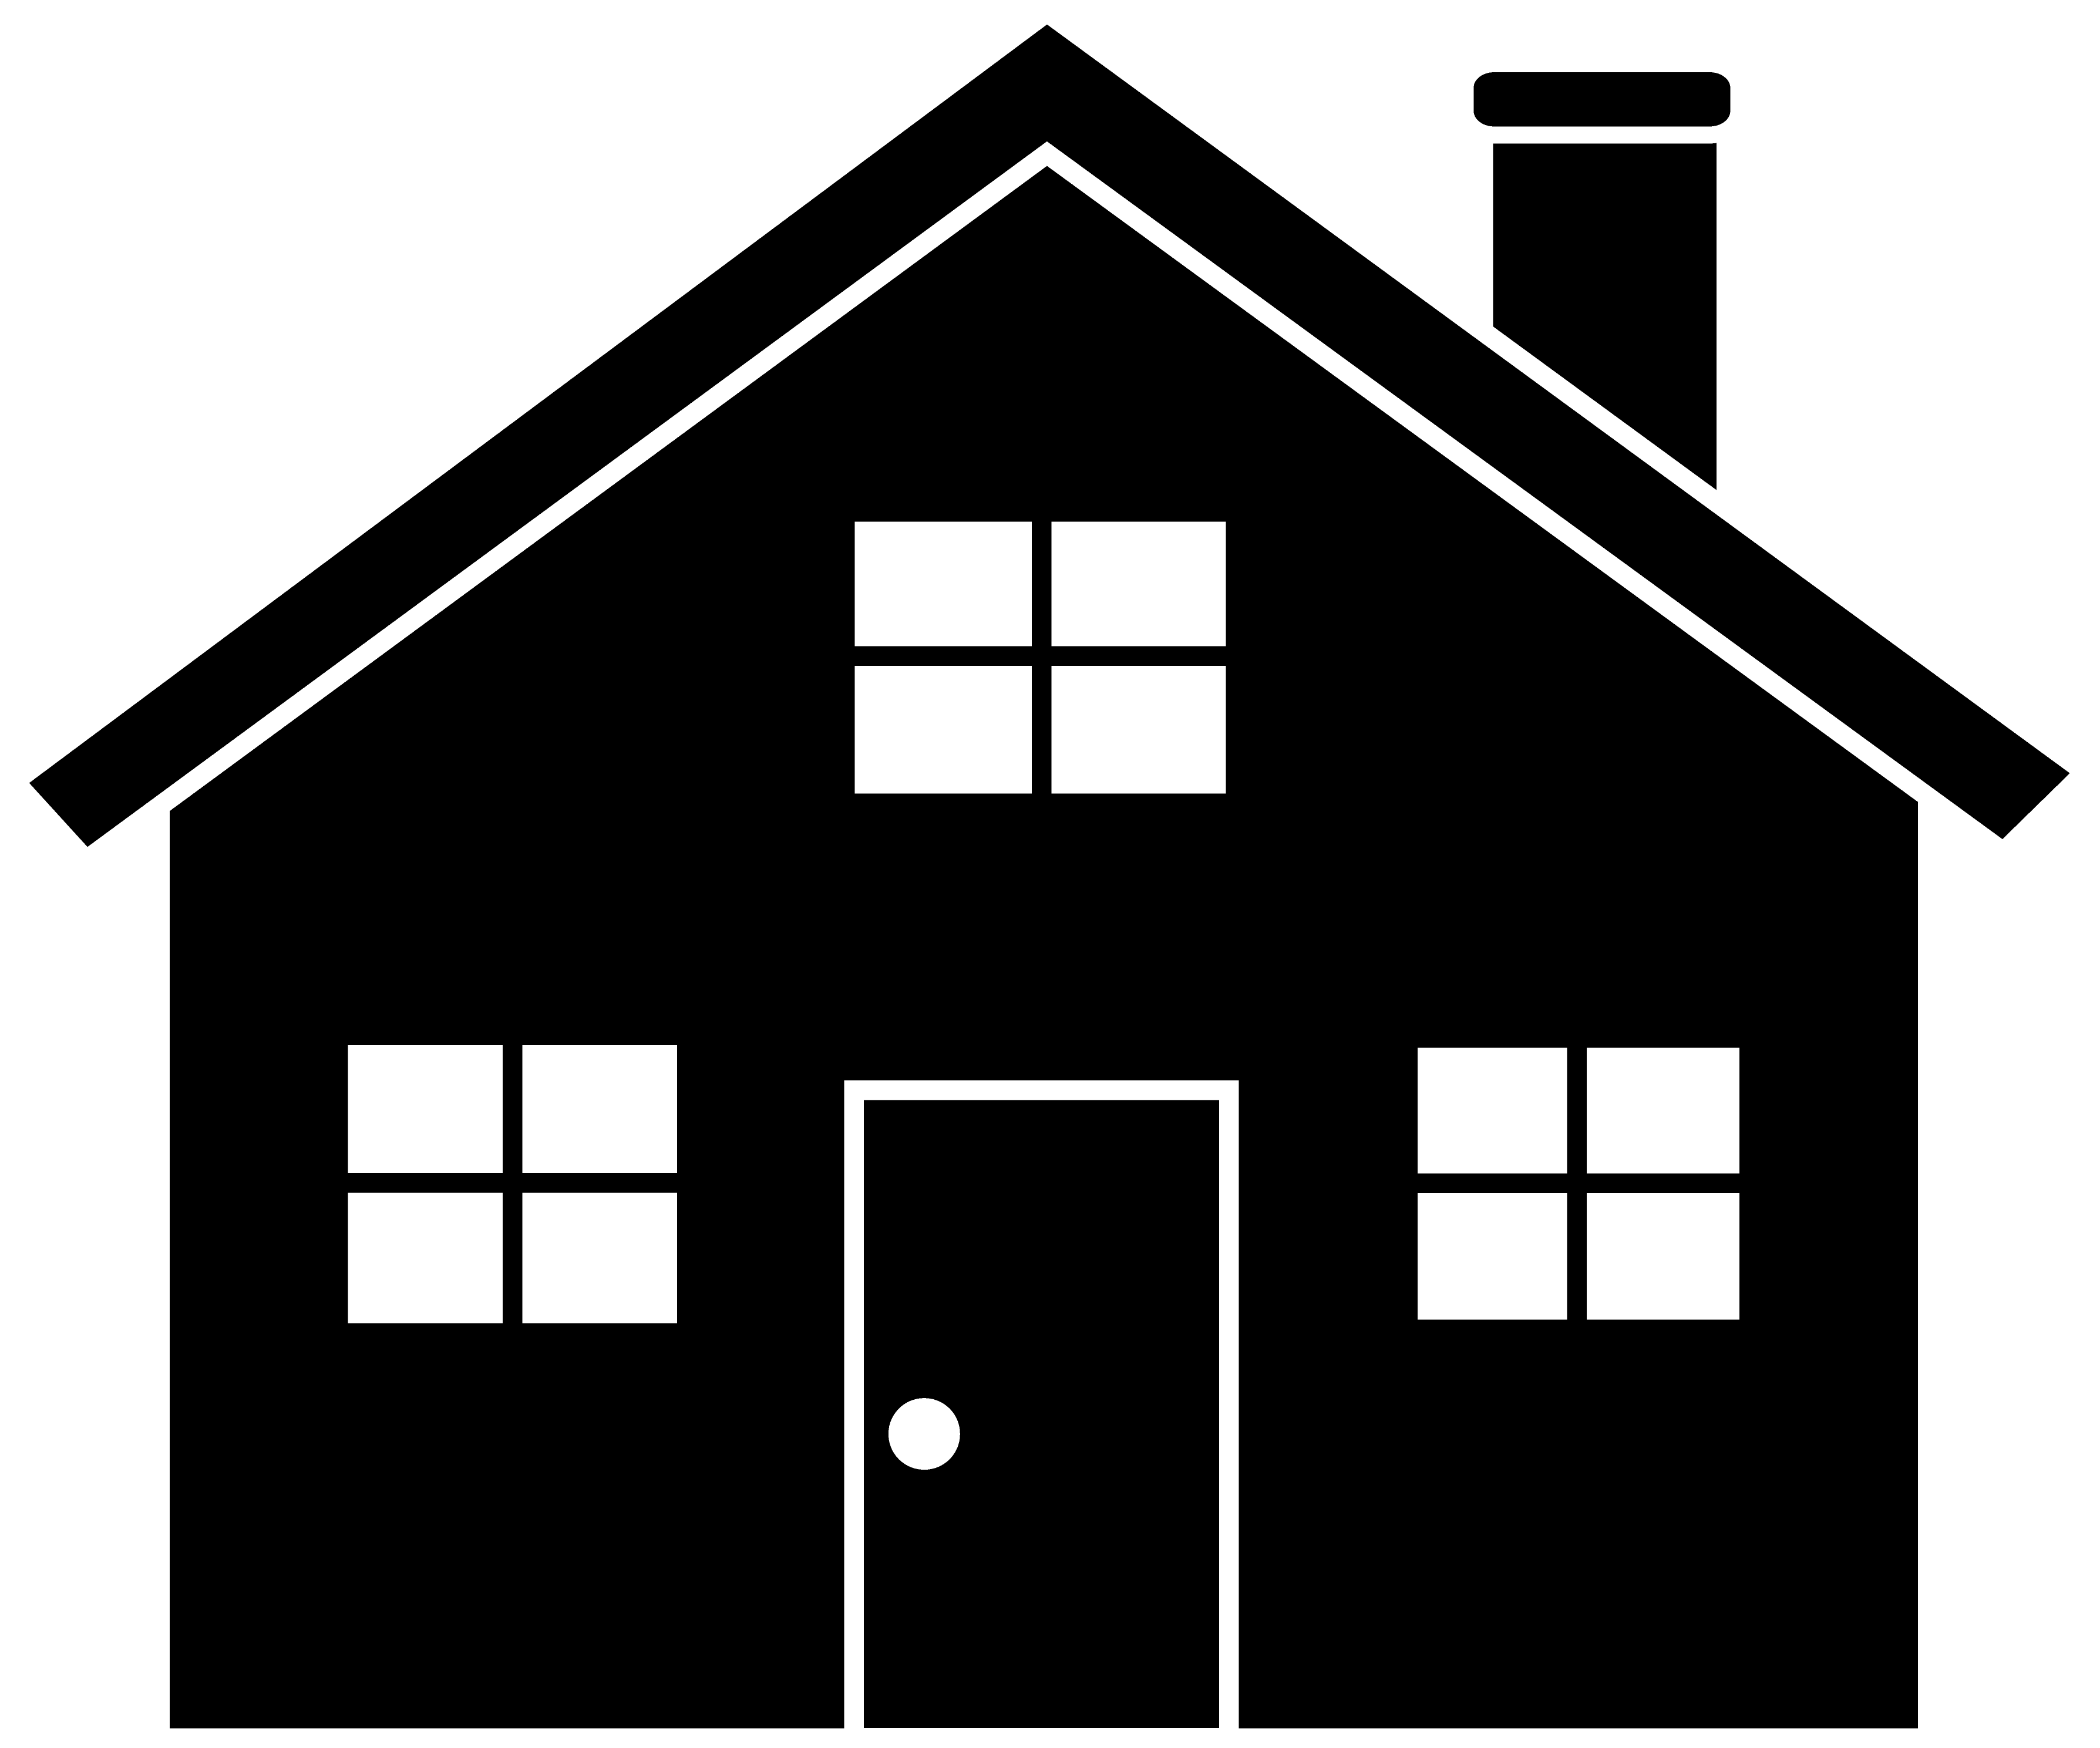 Background clipart house. Image of black graphics